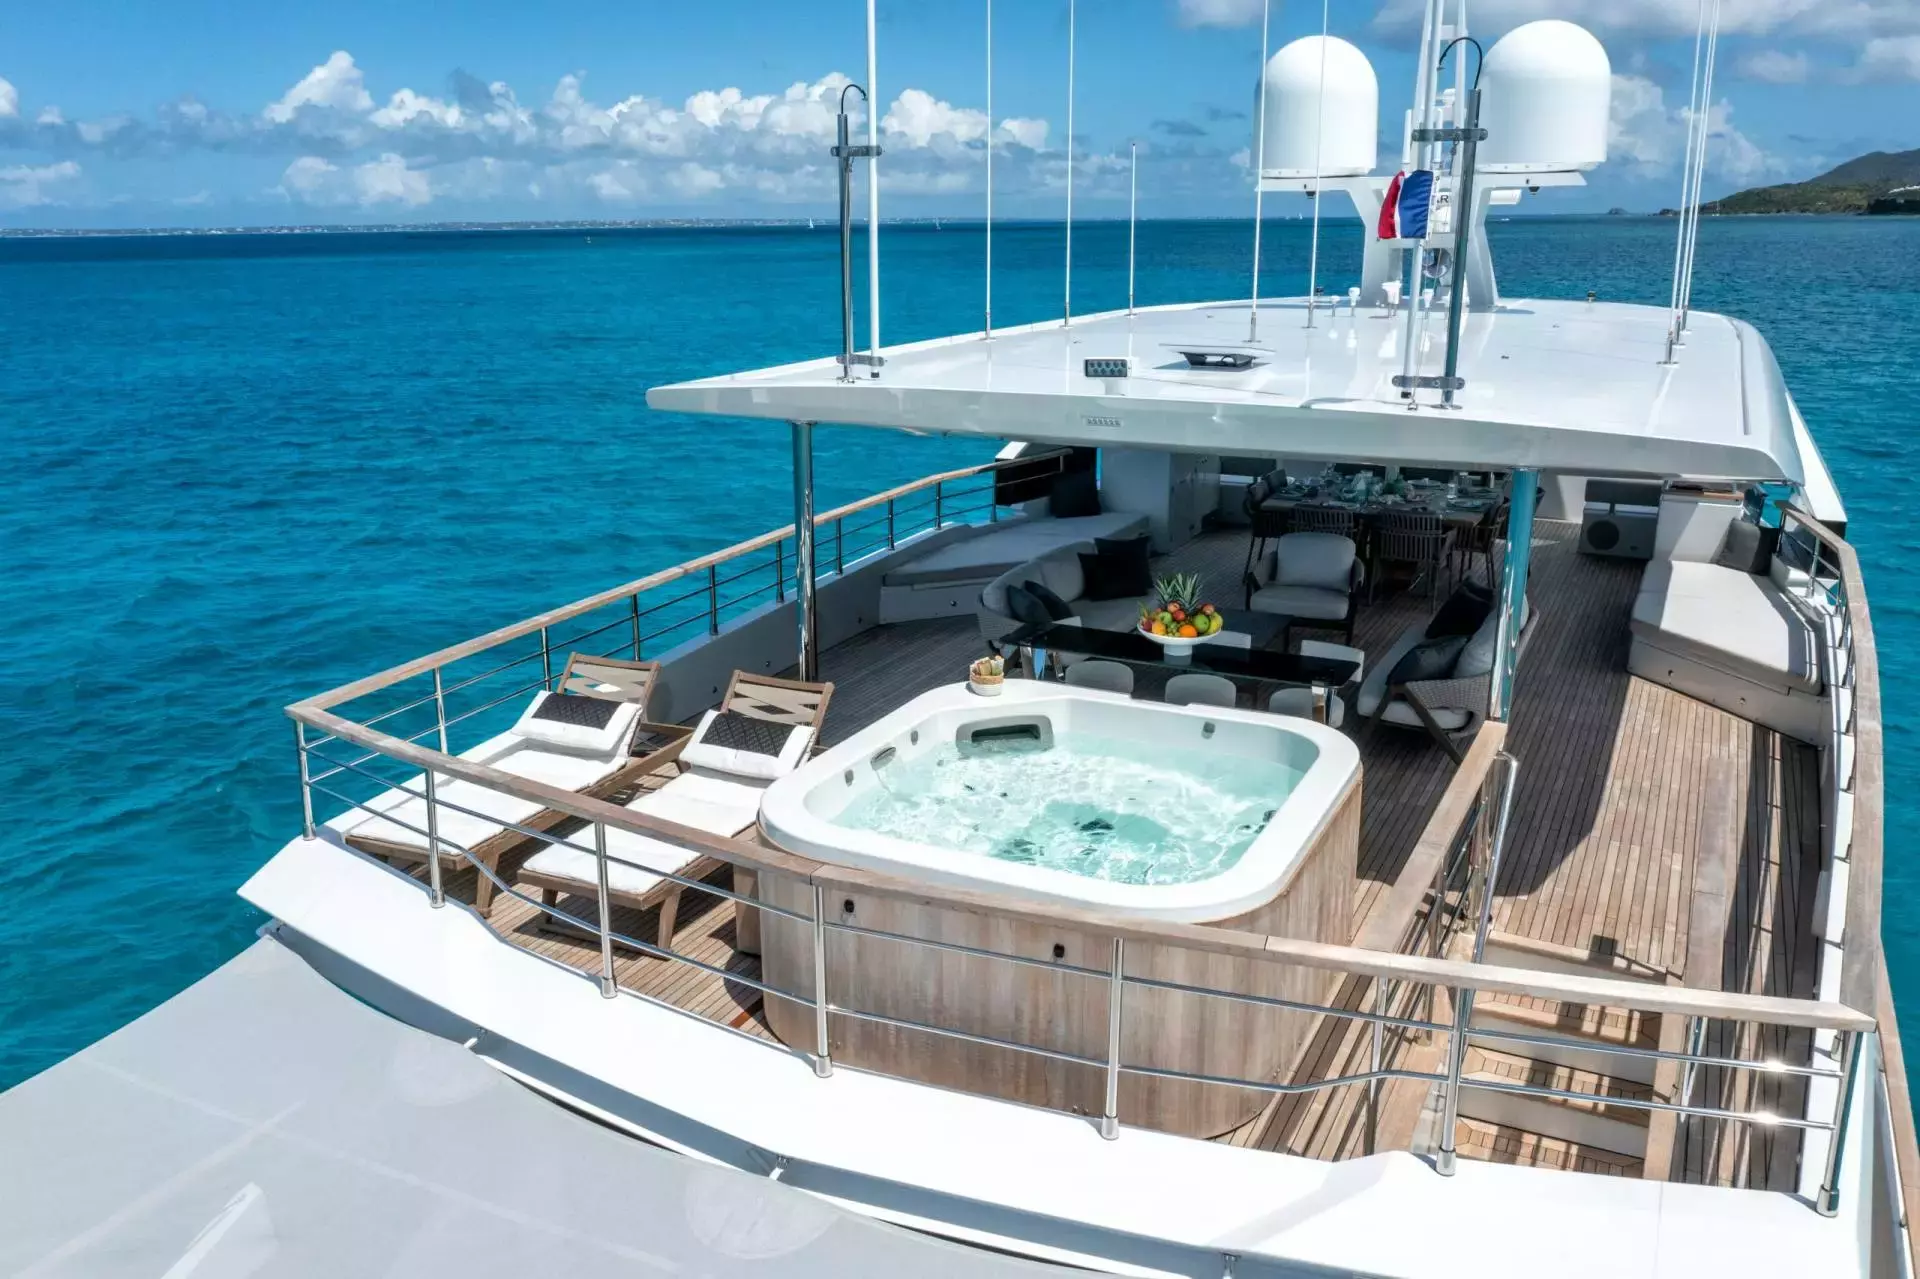 Rockit by Numarine - Top rates for a Charter of a private Superyacht in St Lucia